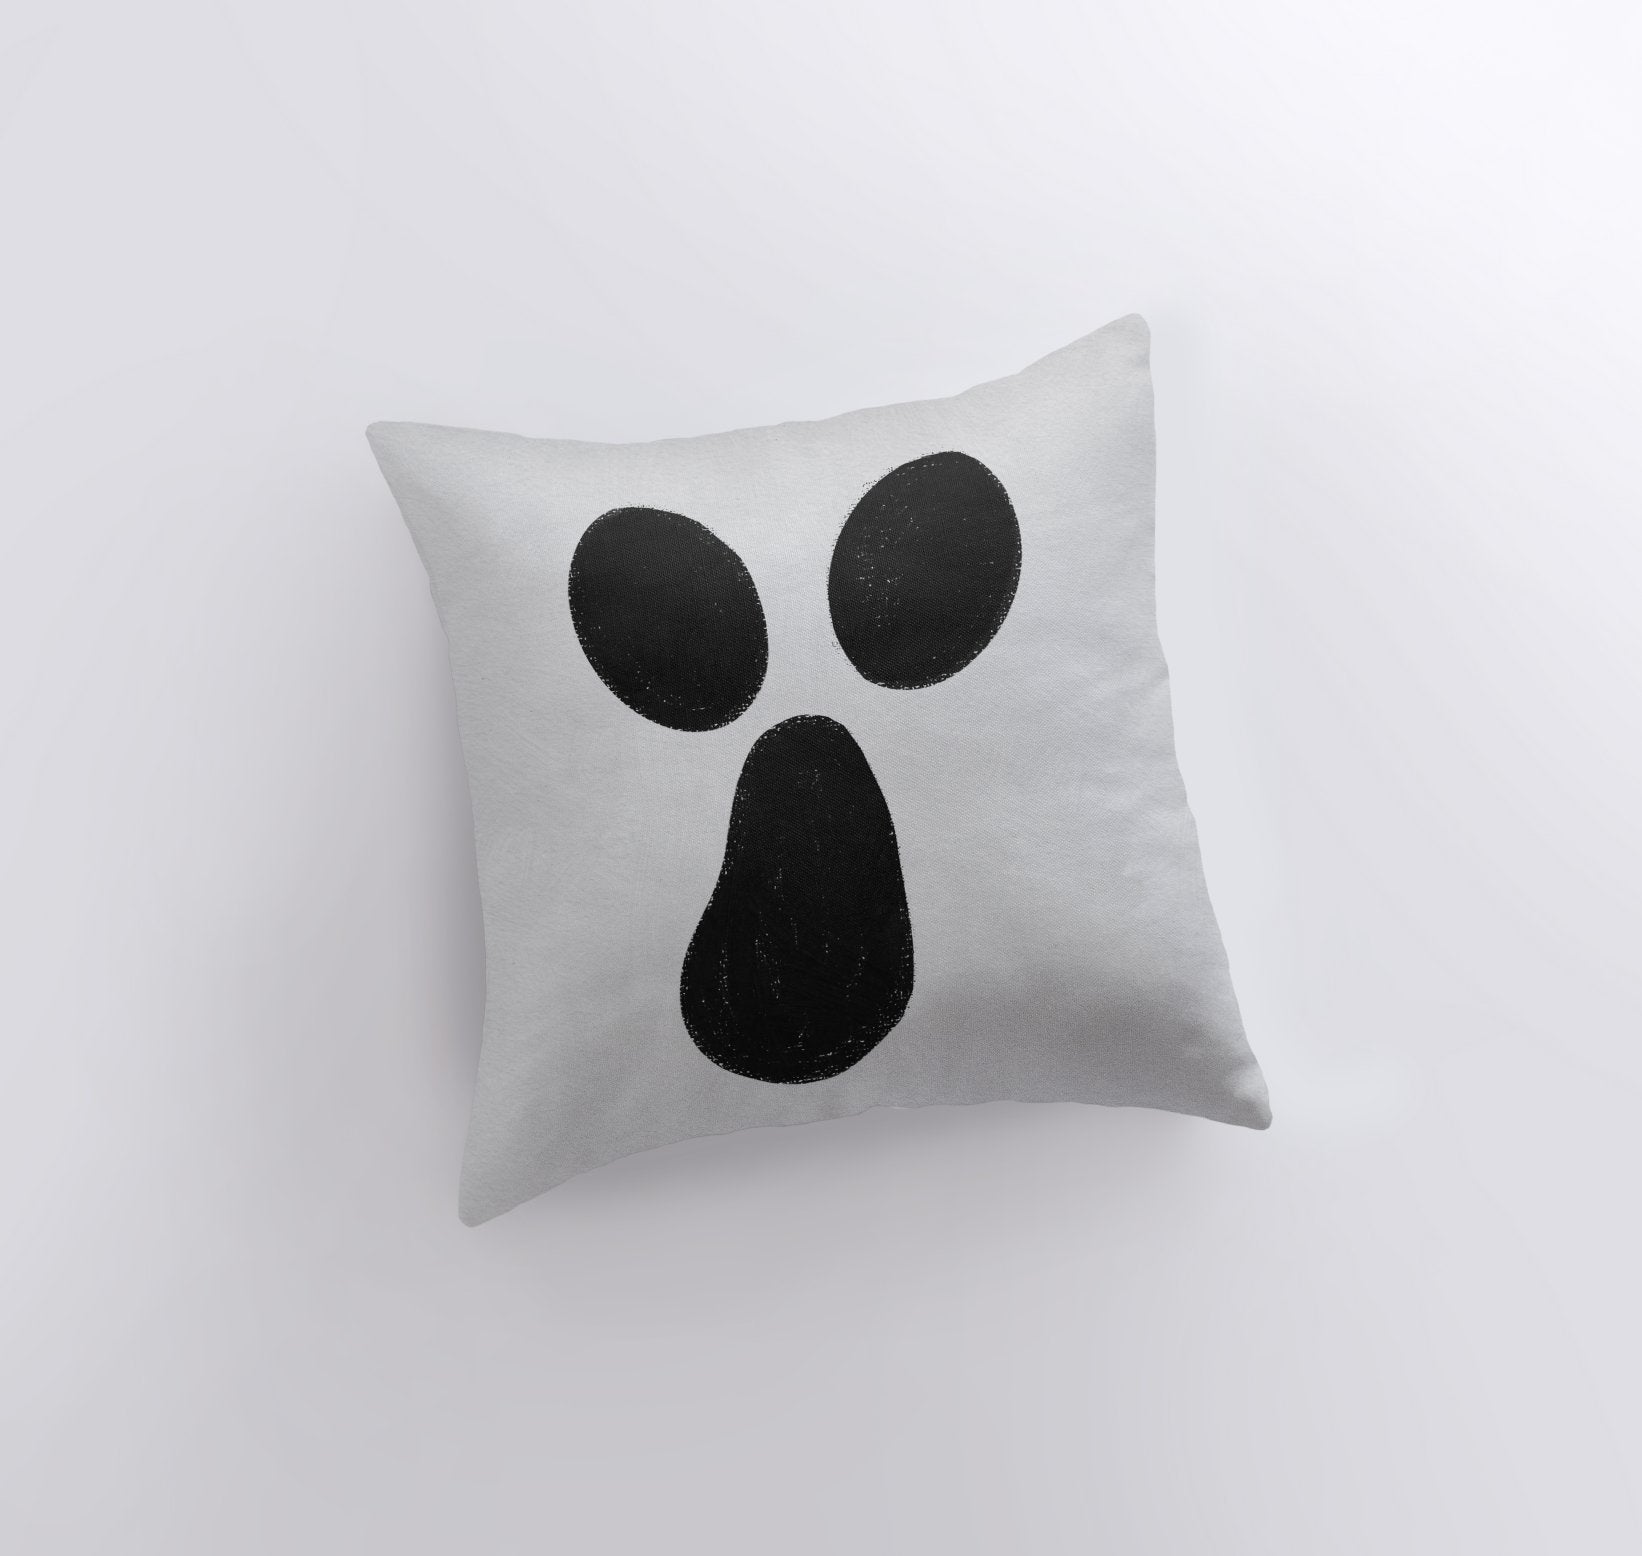 MINI Ghost on White Pillow Cover